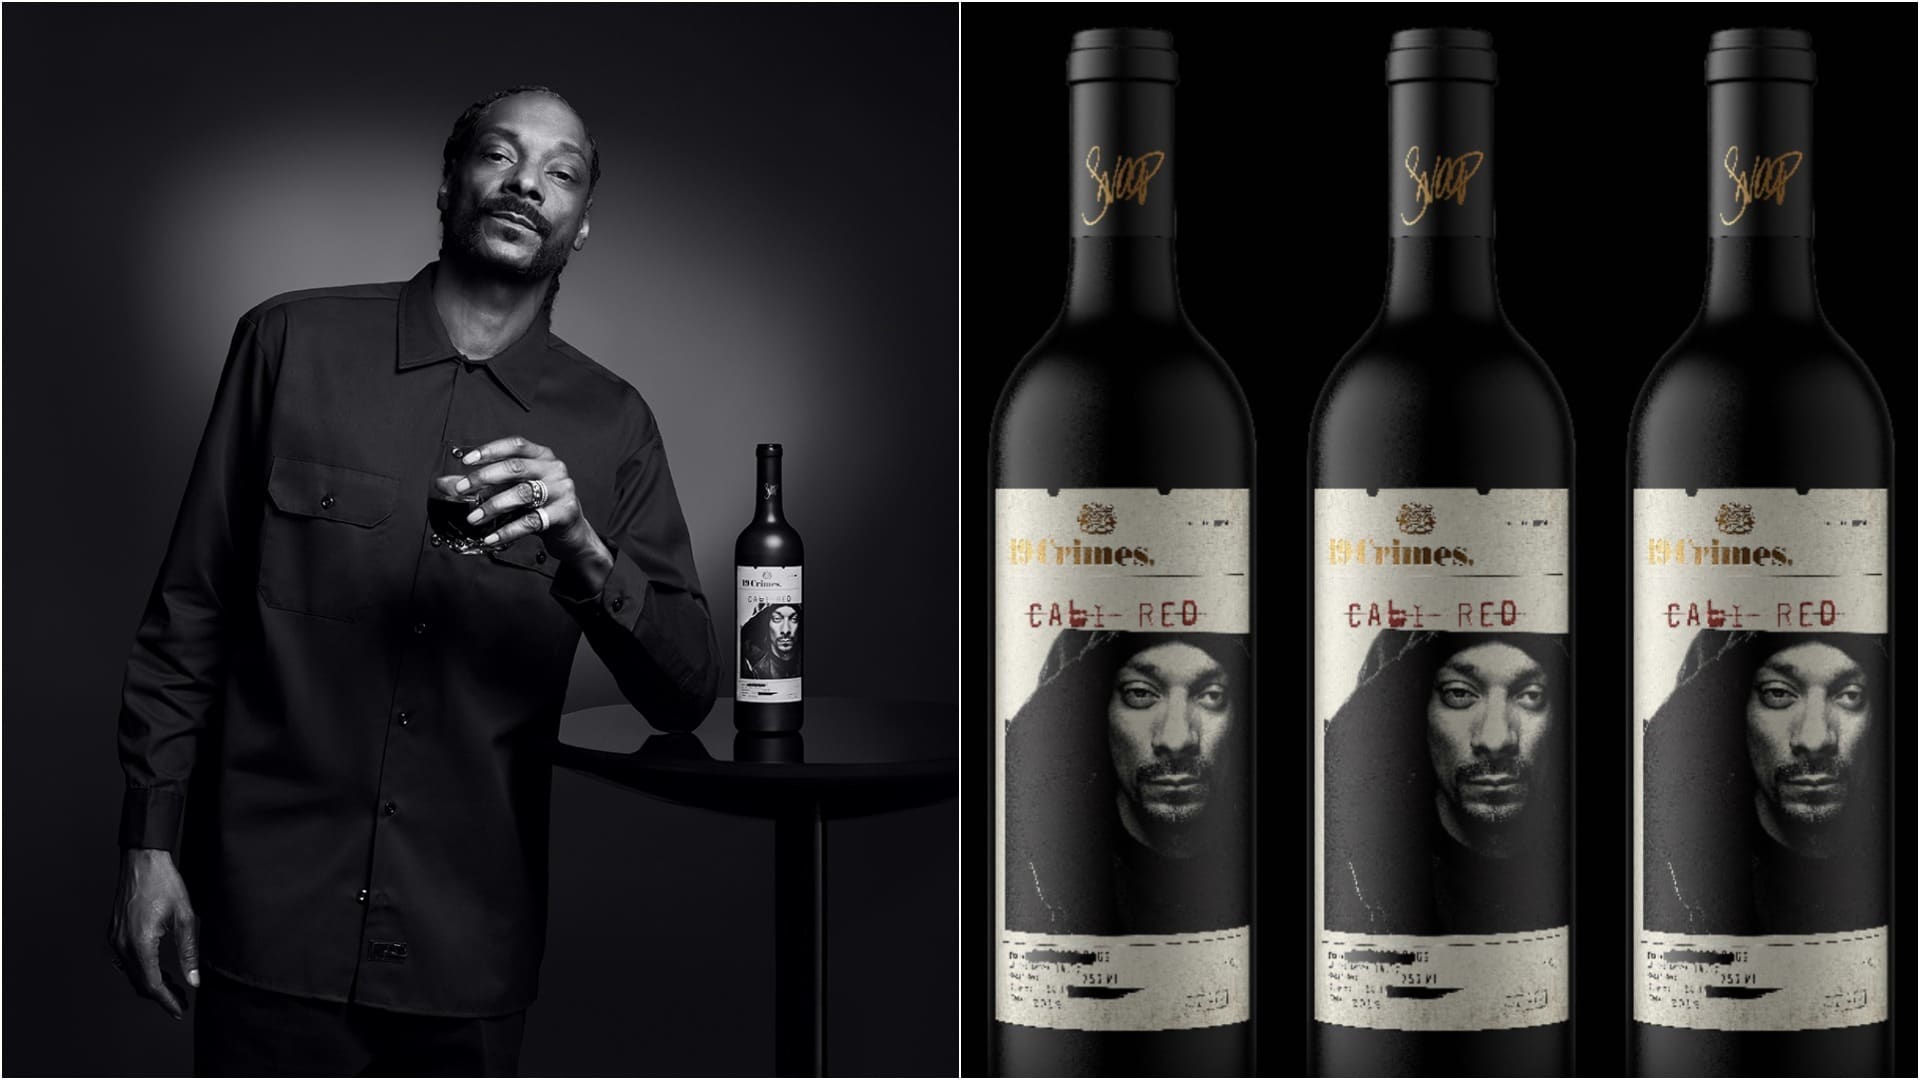 19 Crimes Snoop Dogg Cali Red: The Ultimate Bottle Guide